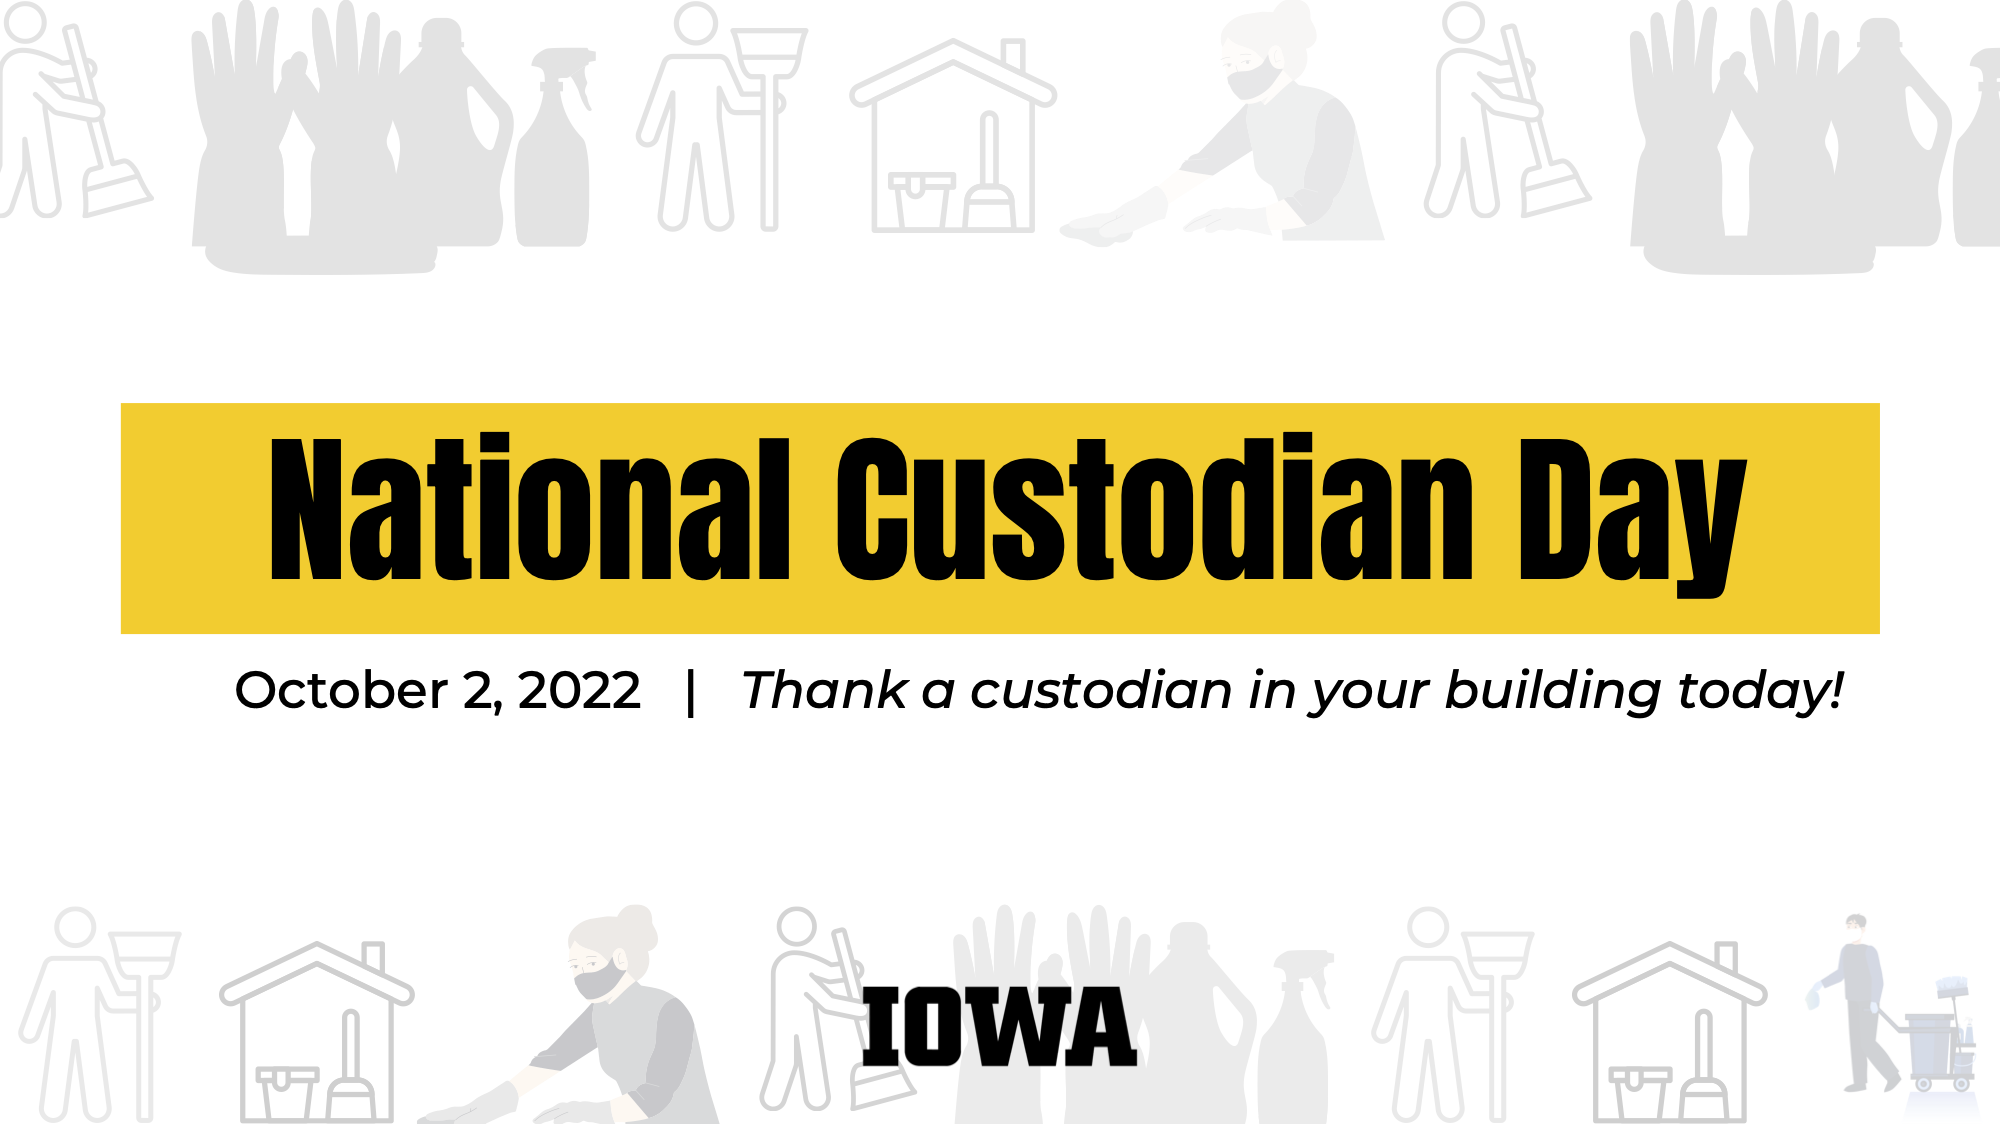 National Custodian Day - Thank a custodian in your building today!